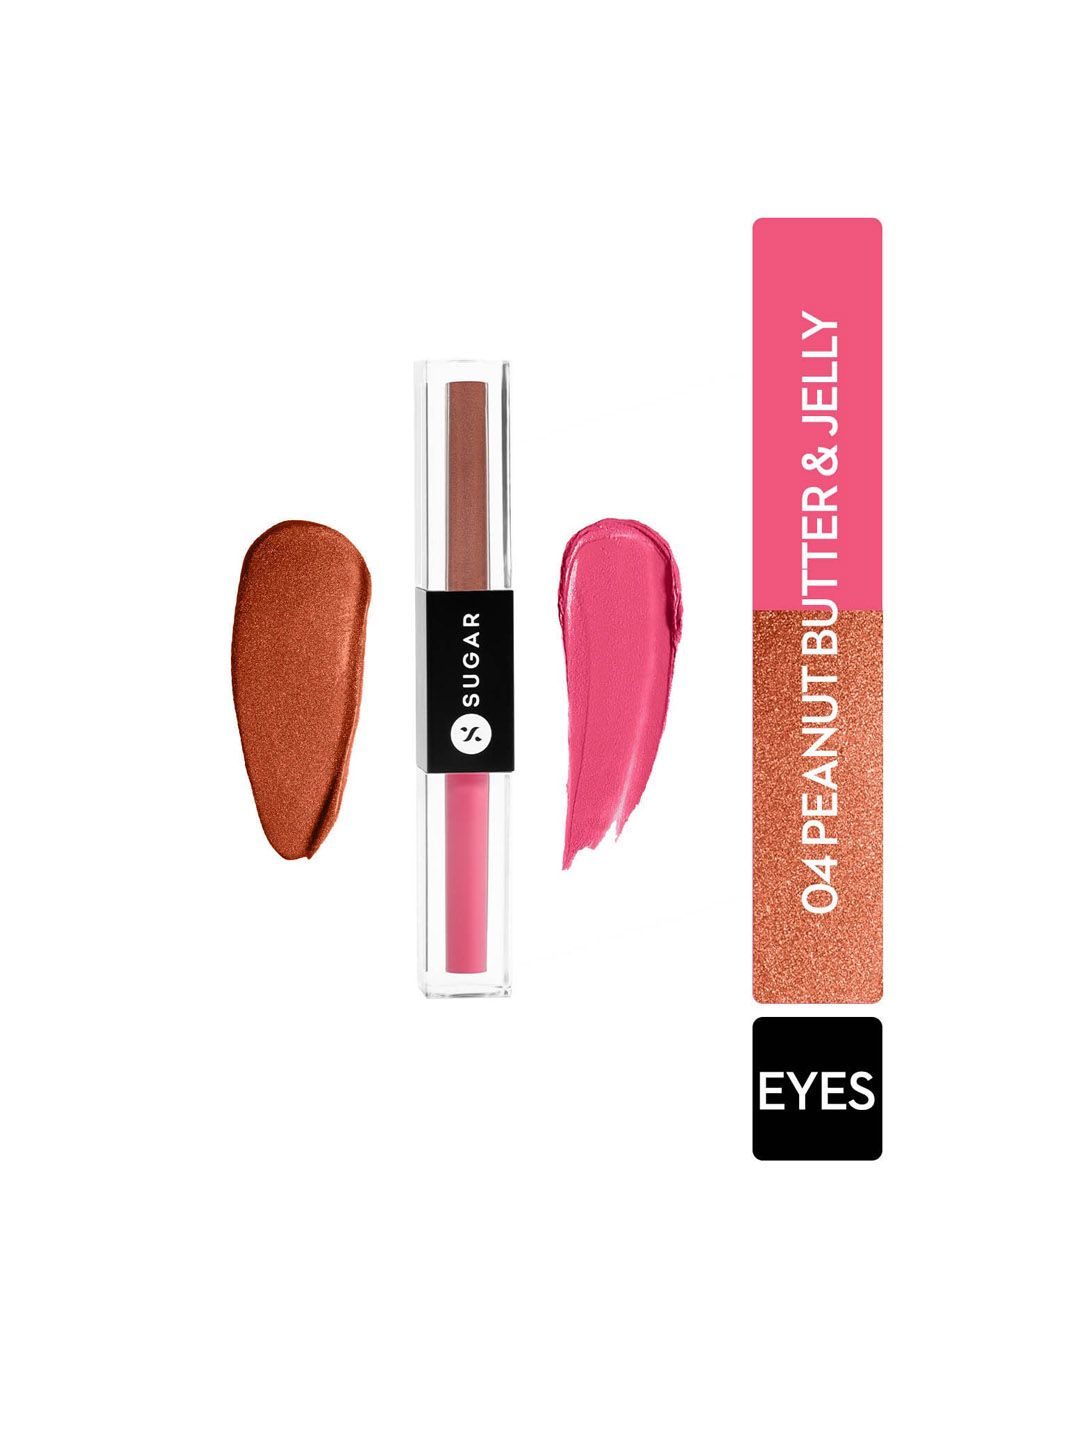 SUGAR Two Good To Be True Dual Eyeshadow 1.5ml Each Side - 04 Peanut Butter & Jelly Price in India